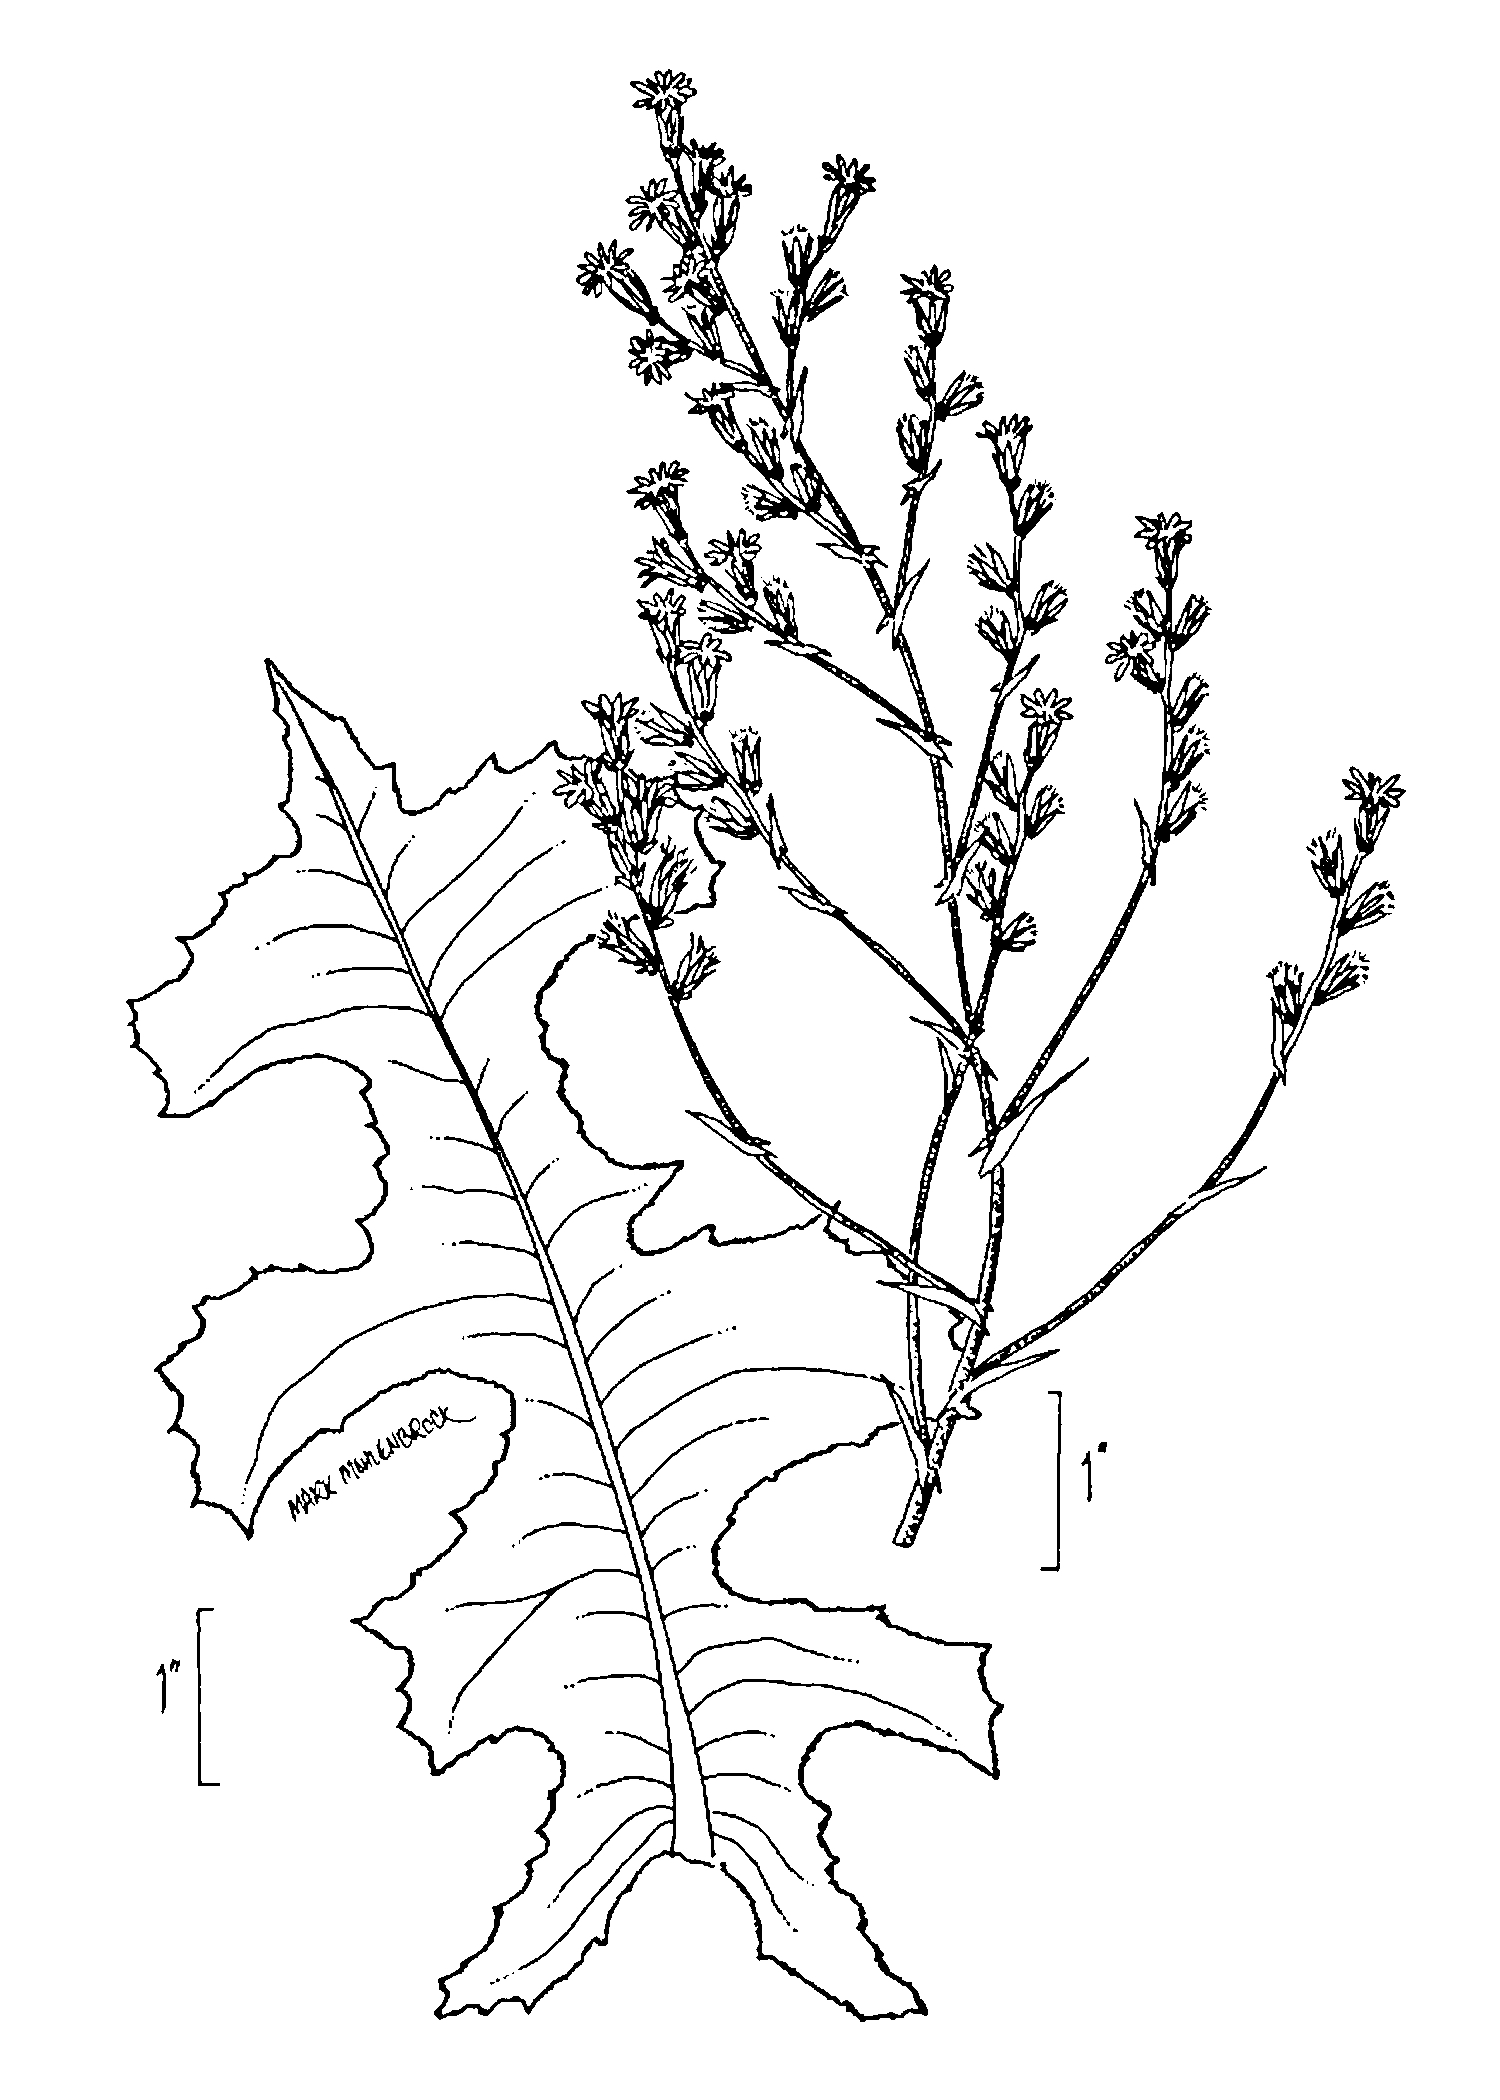 Prickly Lettuce line drawing from USDA  NRCS, Wetland flora: Field office illustrated guide to plant species.